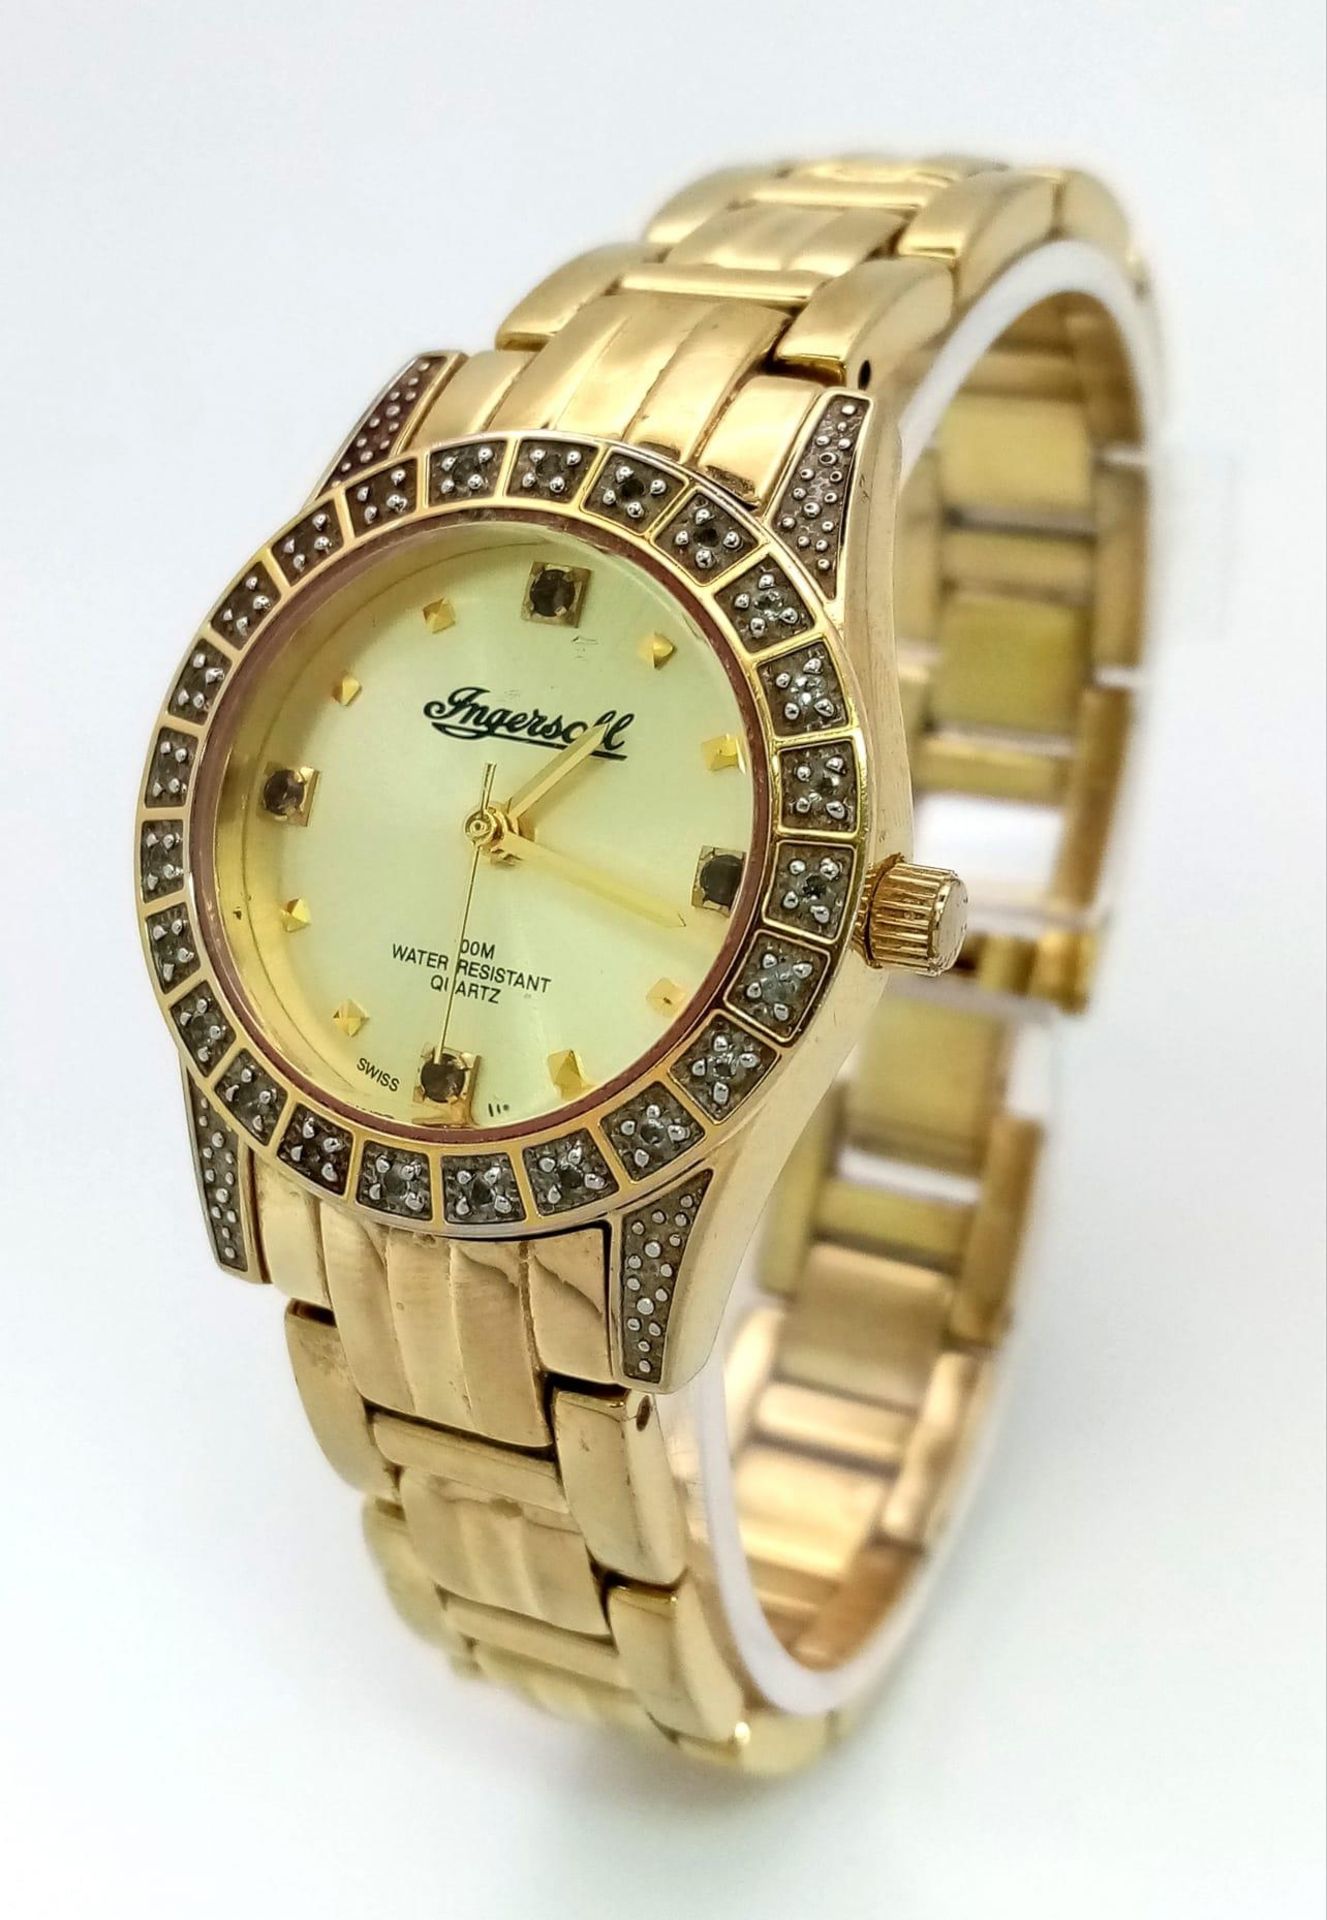 An Ingersoll Gold Plated Ladies Quartz Watch. Gold plated bracelet and case - 28mm. Gold tone dial